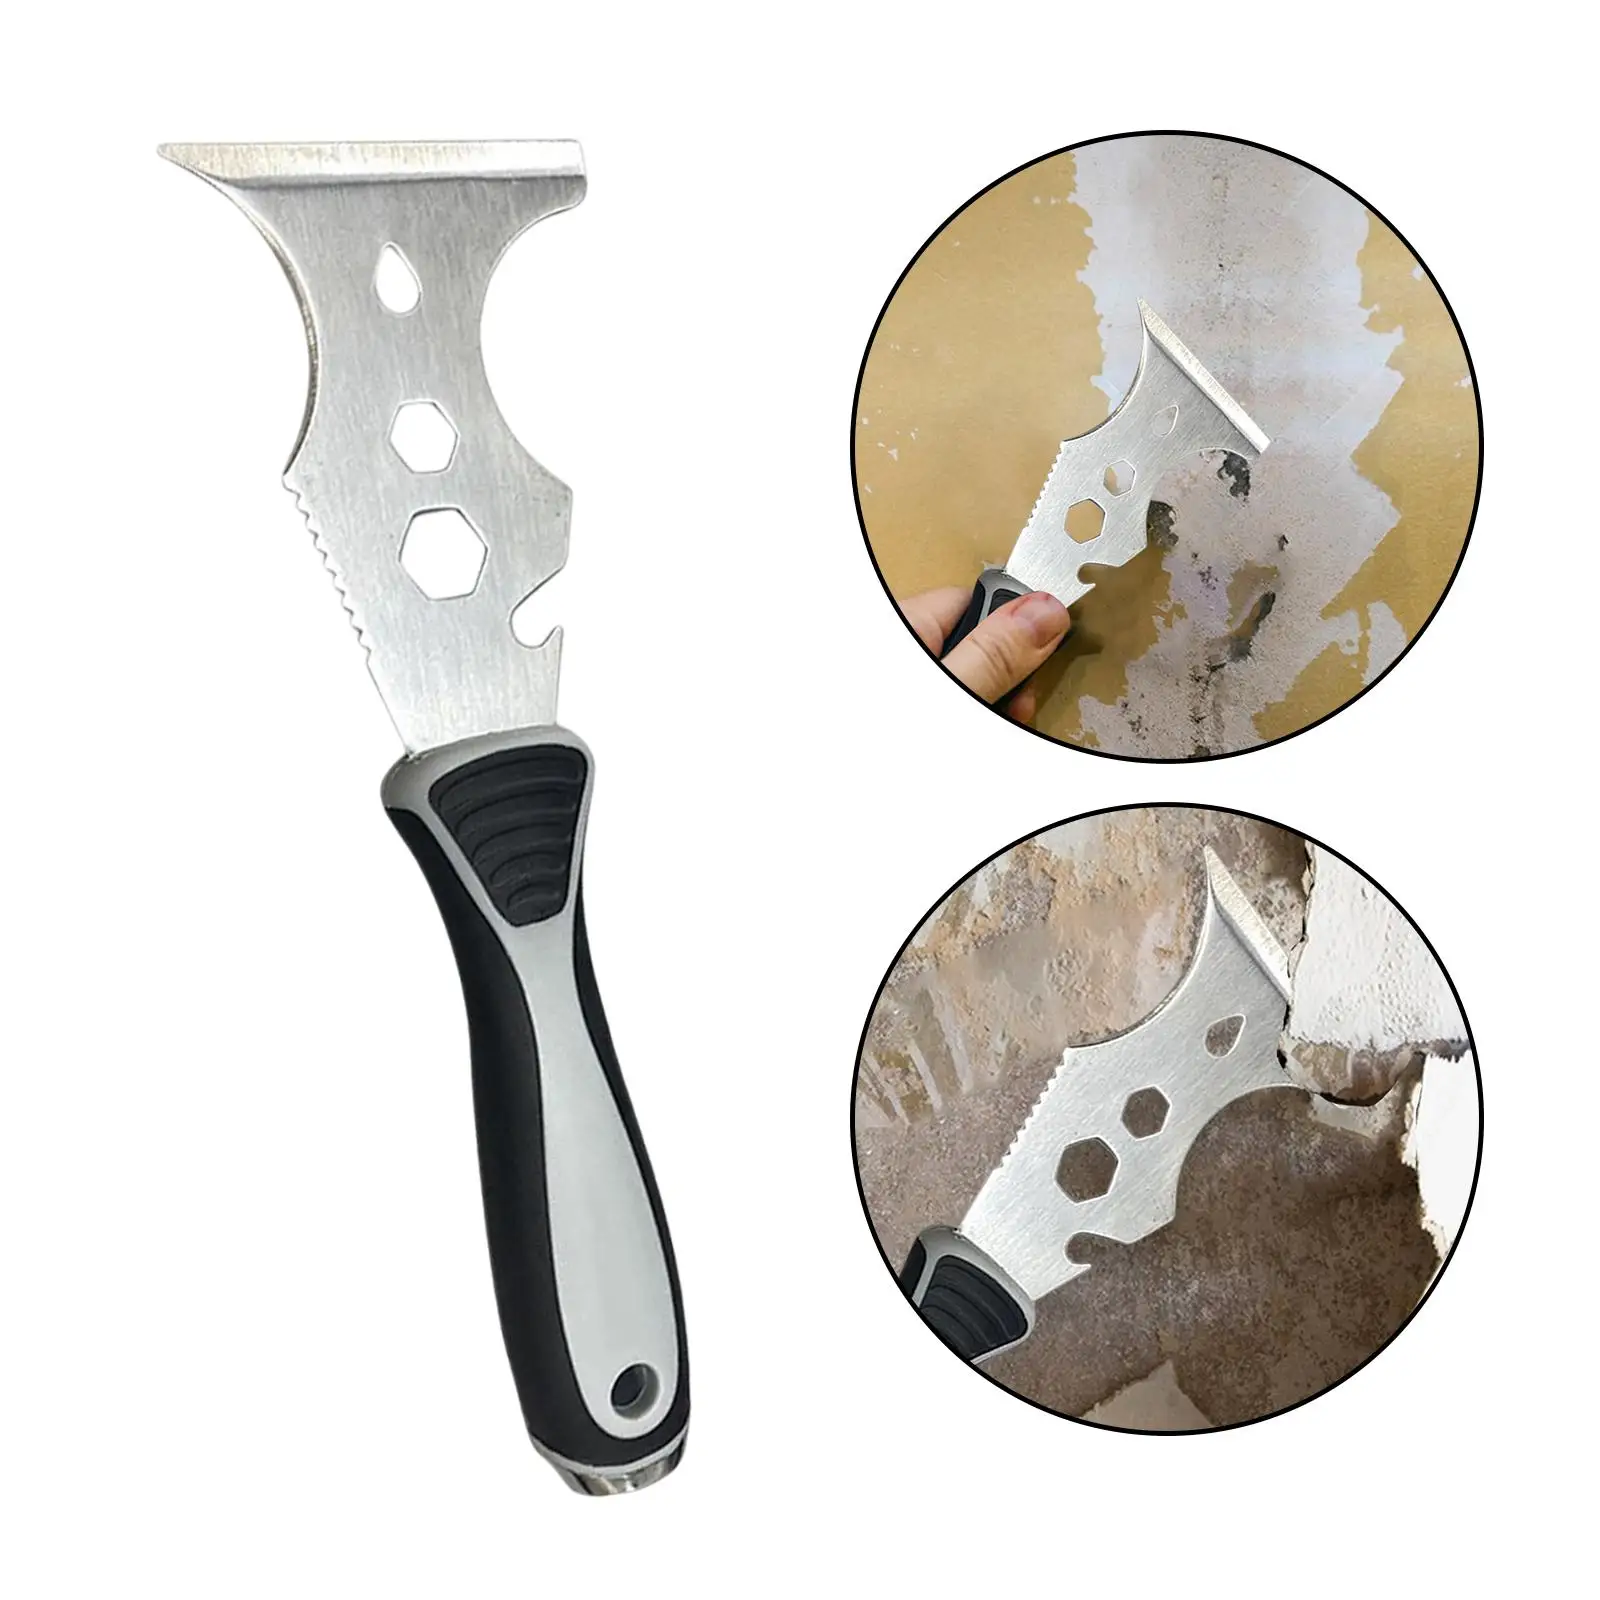 Stainless Steel Paint Scraper Removal Tool Paint Remover Professional Multi Use Putty Knife daily cleaning Repair